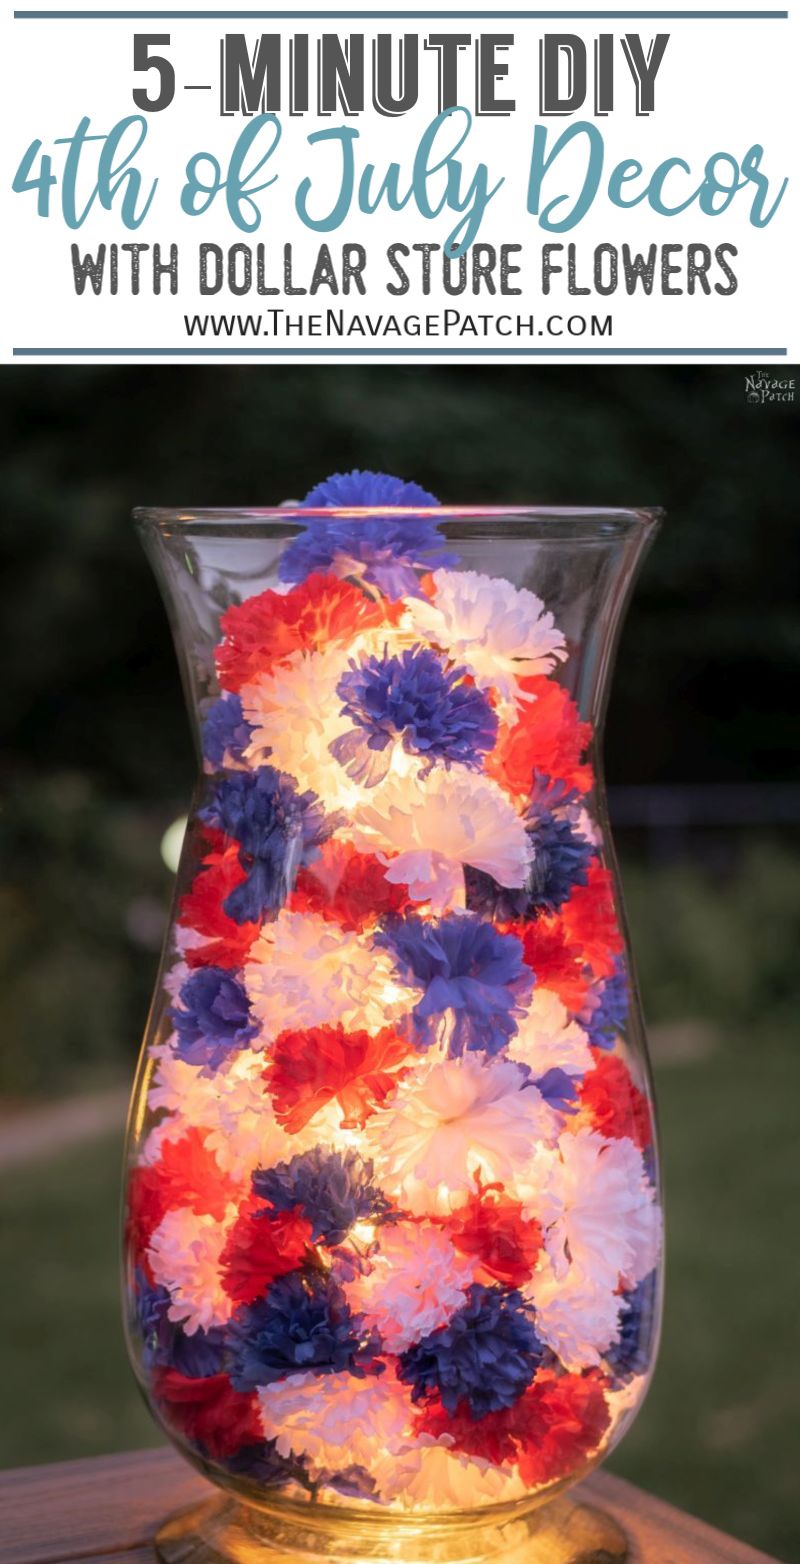 5-Minute Fourth of July Decor | TheNavagePatch.com